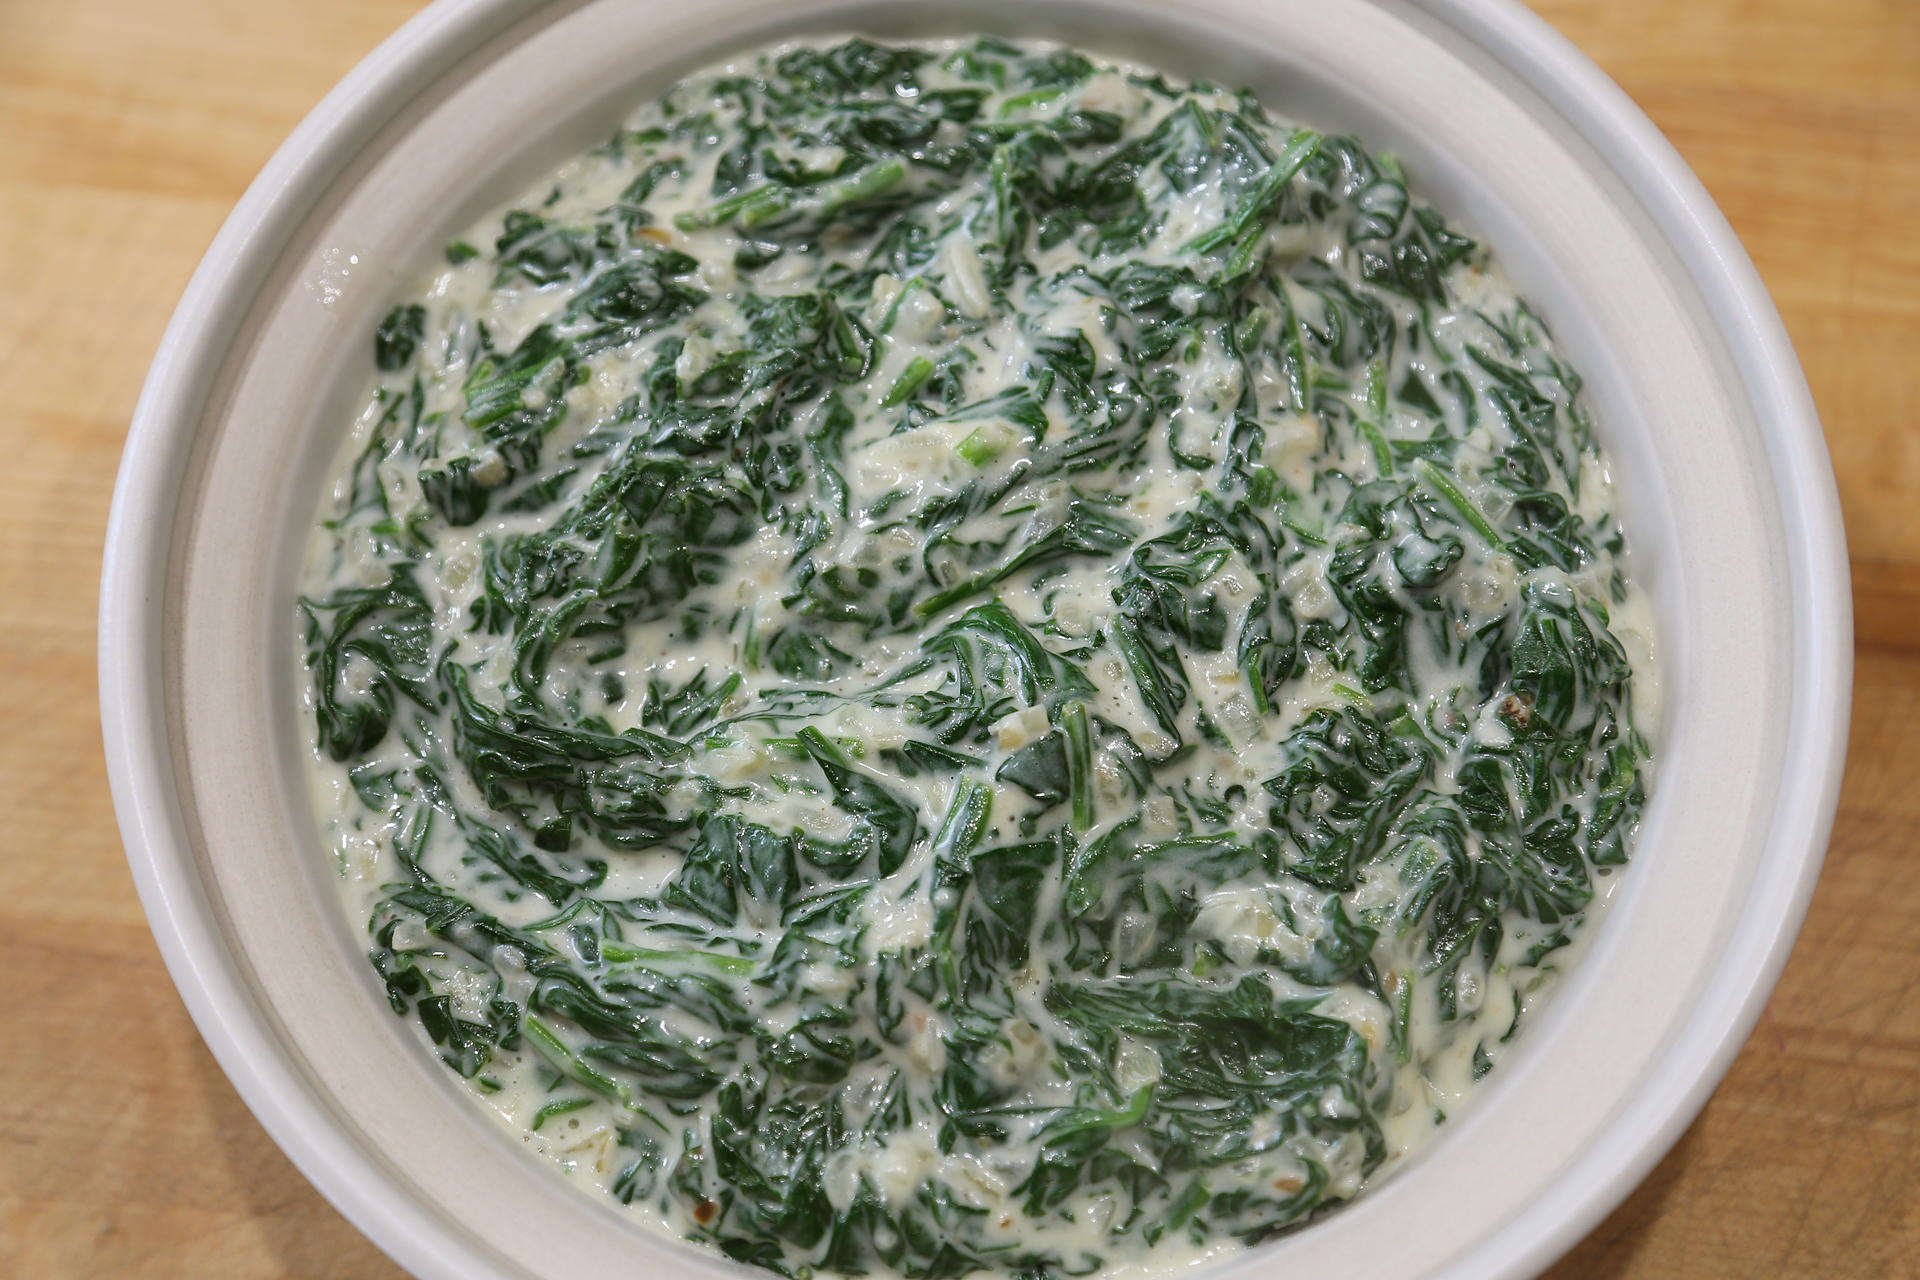 Serve the creamed spinach at once.